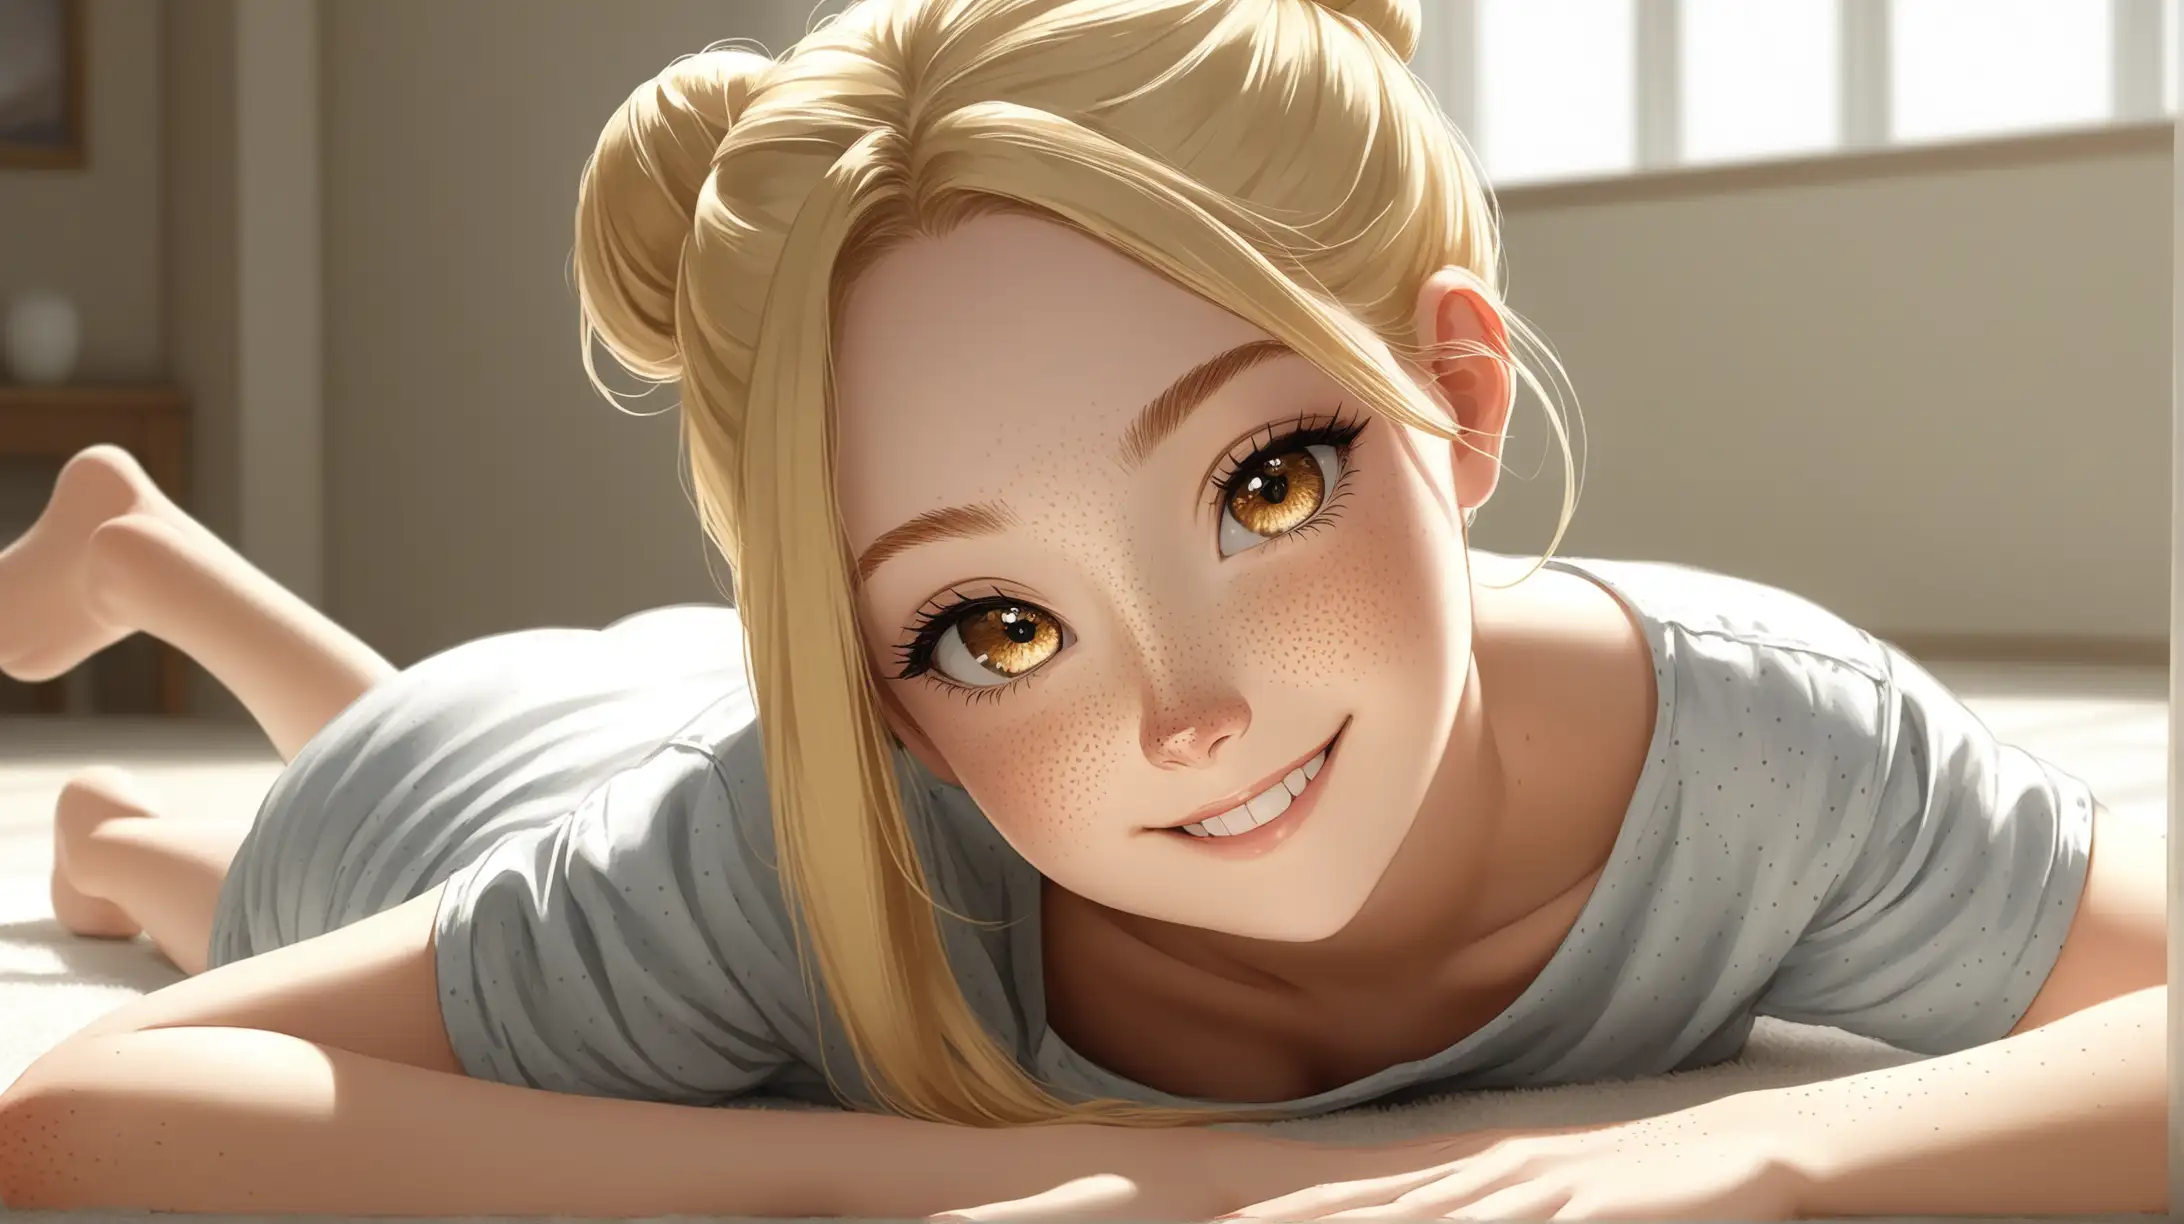 Draw a young woman, long blonde hair in a bun, gold eyes, freckles, perky figure,
casual outfit, high quality, long shot, indoors, laying, natural lighting, smiling at the viewer